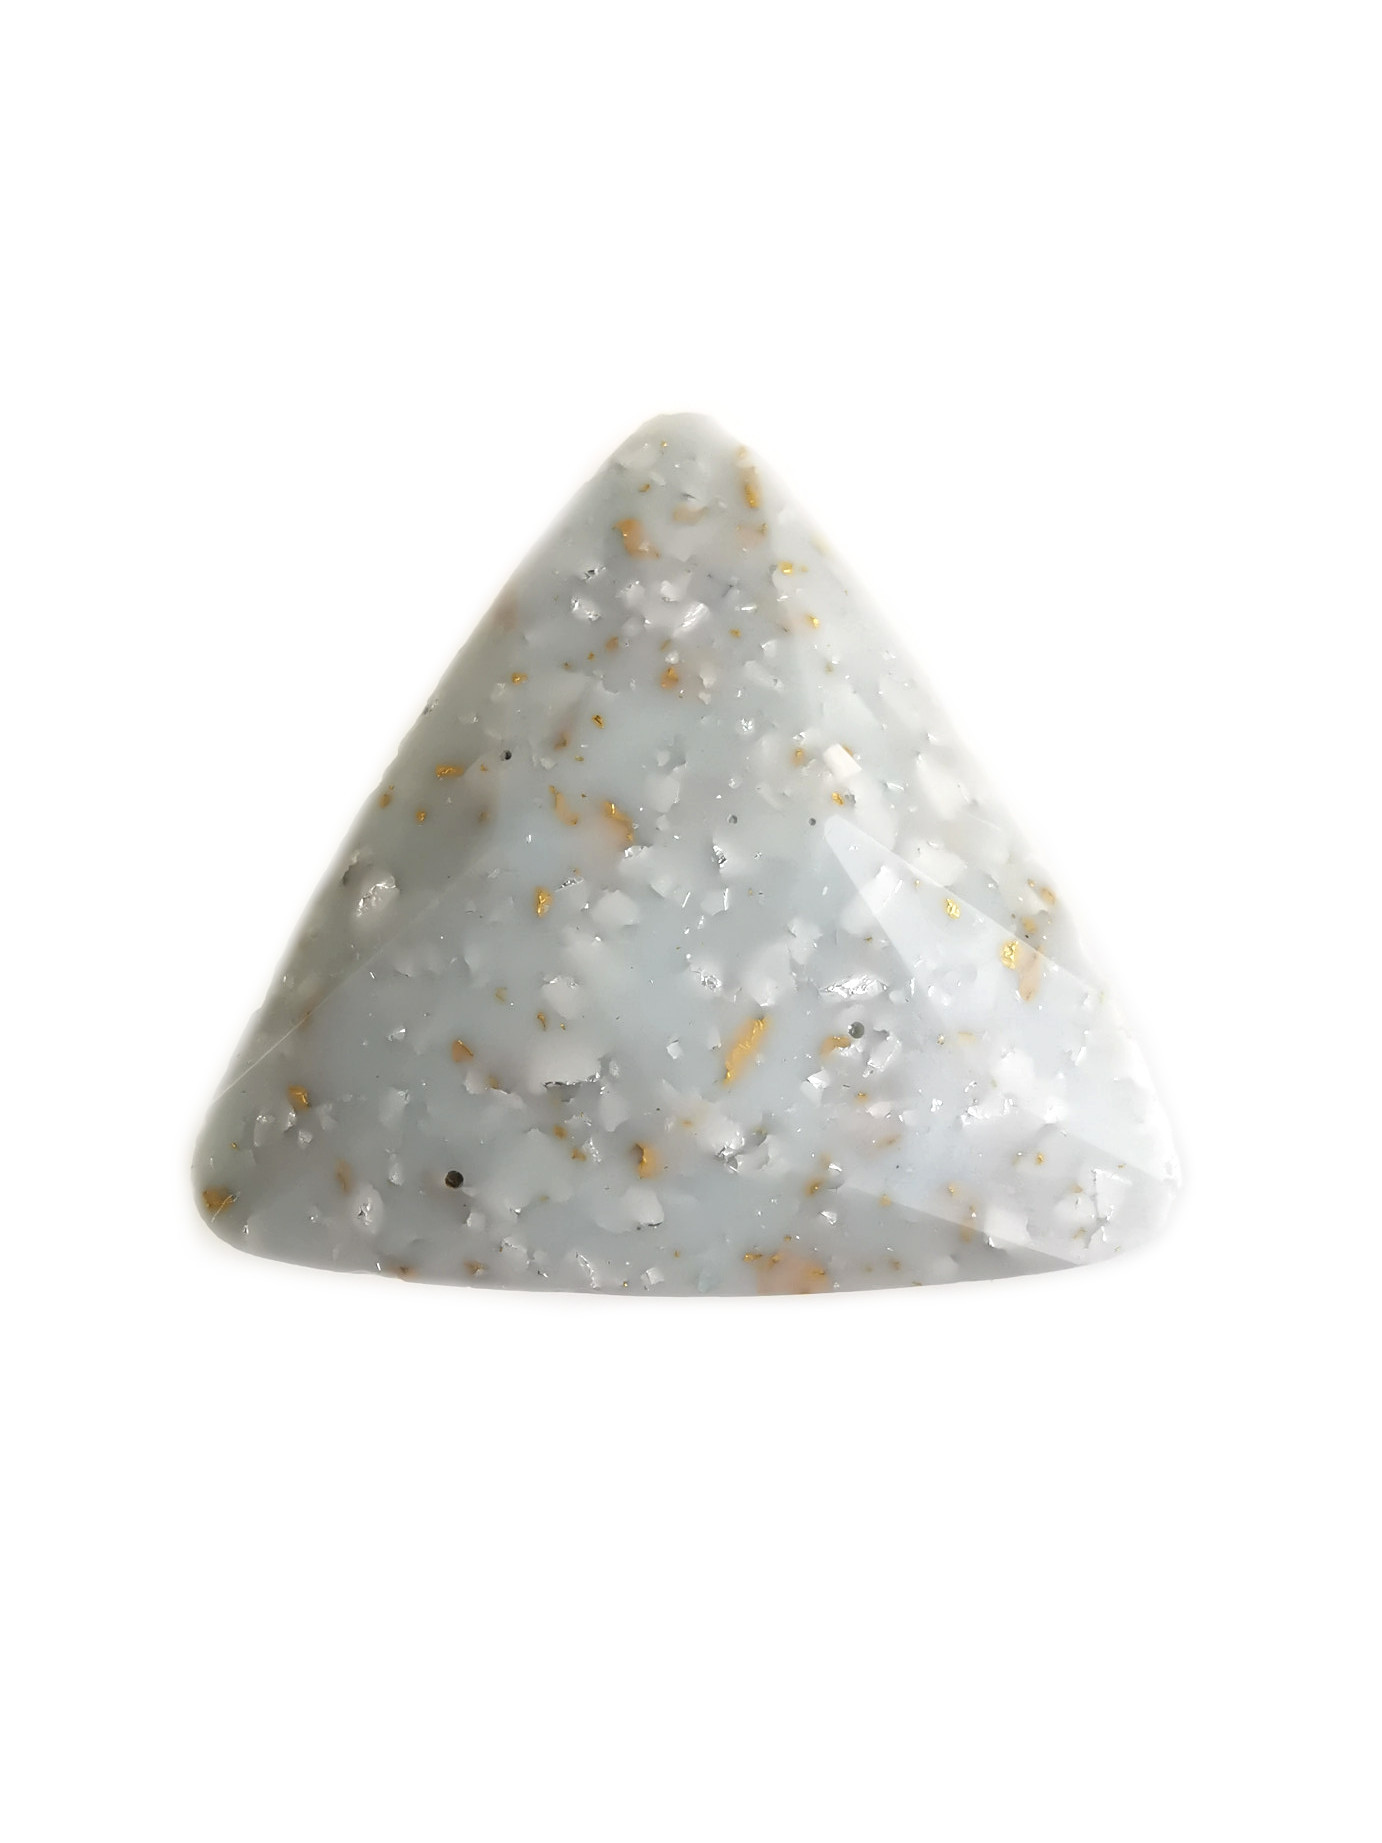 Pistachio White Triangle Orgone Shield by OrgoneVibes